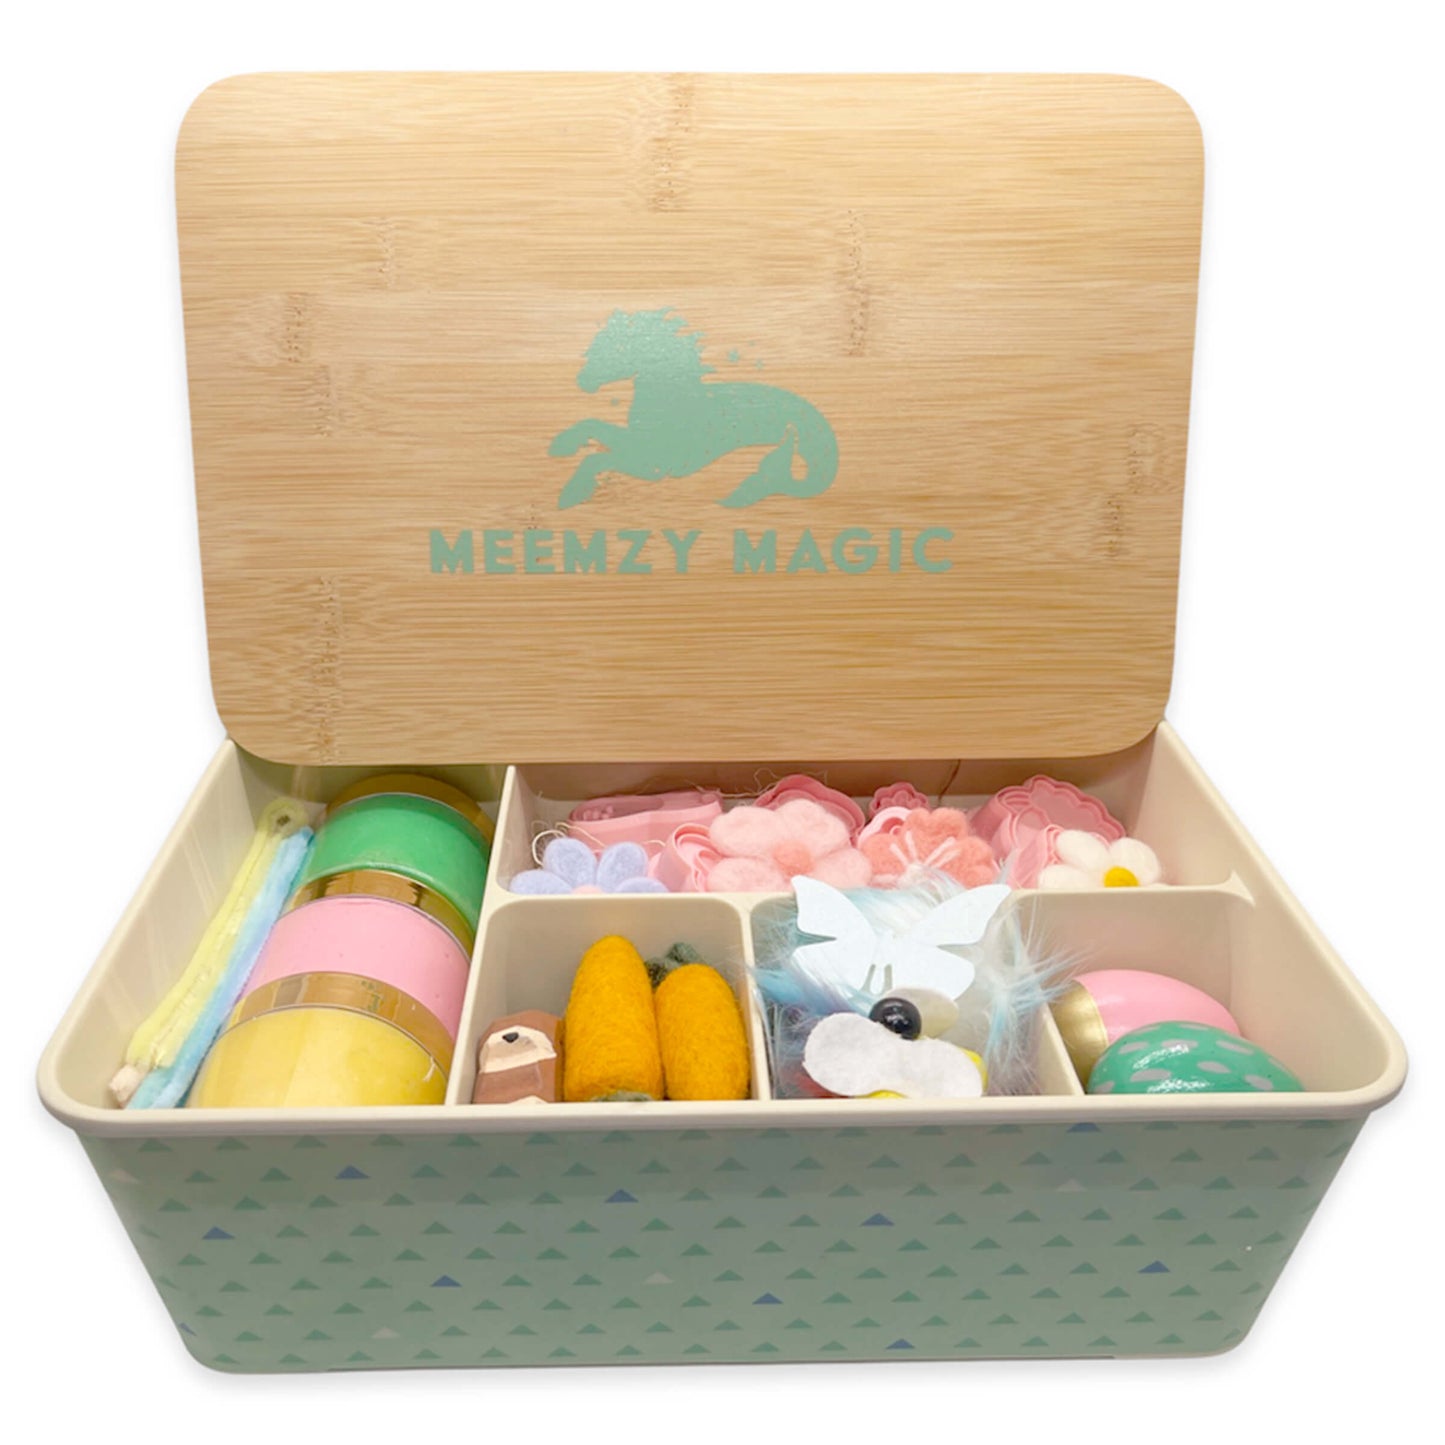 Spring Time sensory kit filled with felt flowers and butter flies, pipe cleaners, felt carrots, wood bunnies, and pastel colored play dough